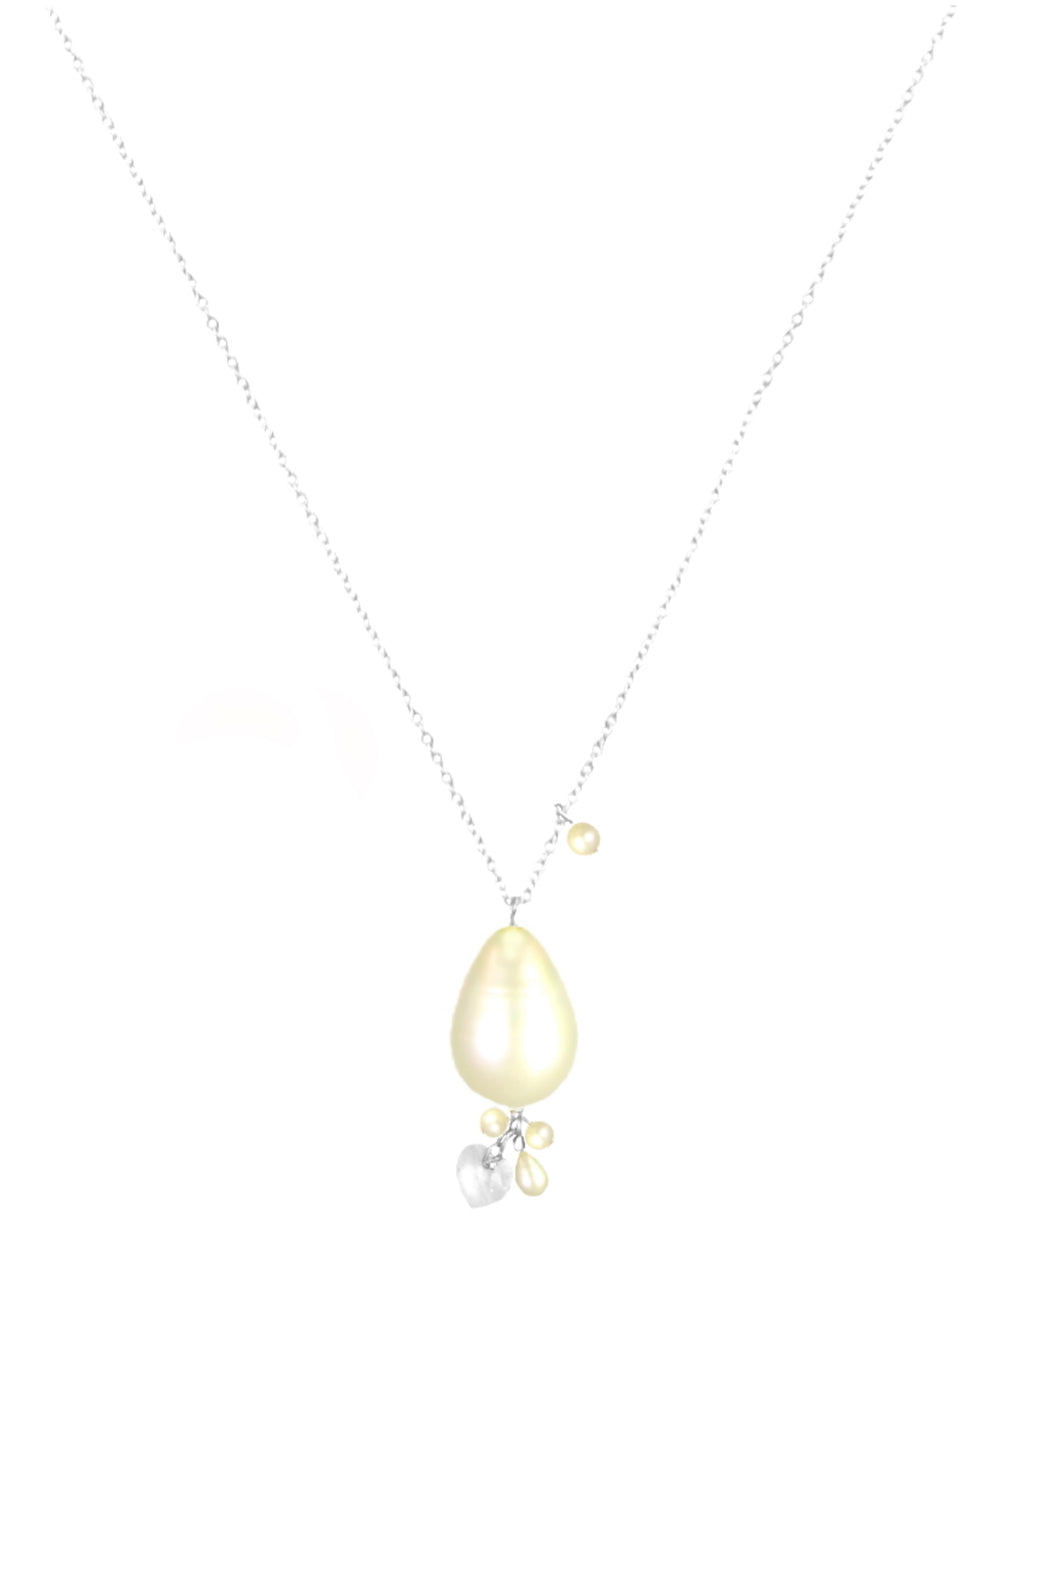 Abby Swarovski Heart Pearls Necklaces in Gold and Silver